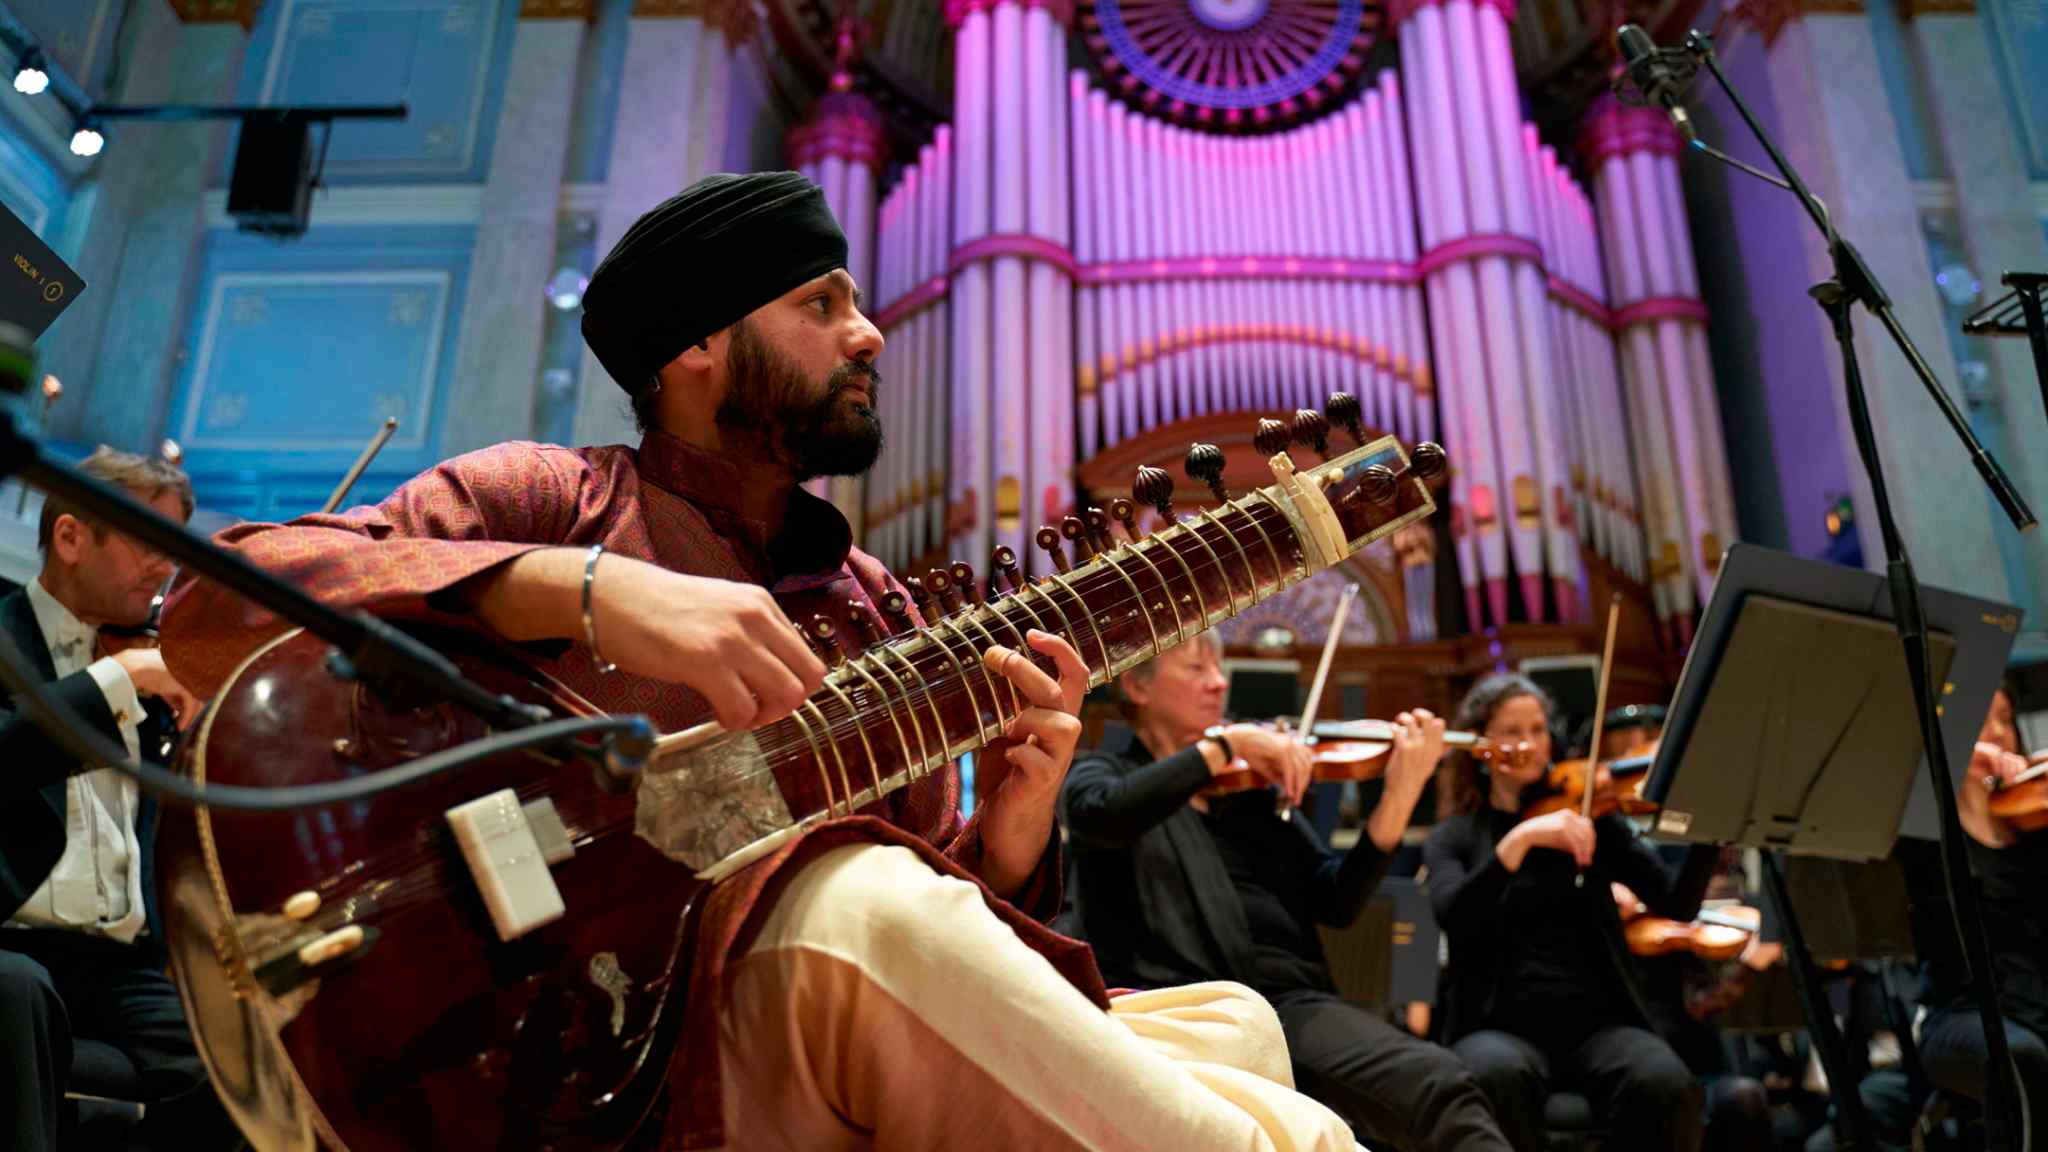 Italian baroque and Indian classical music meet in a new Orpheus